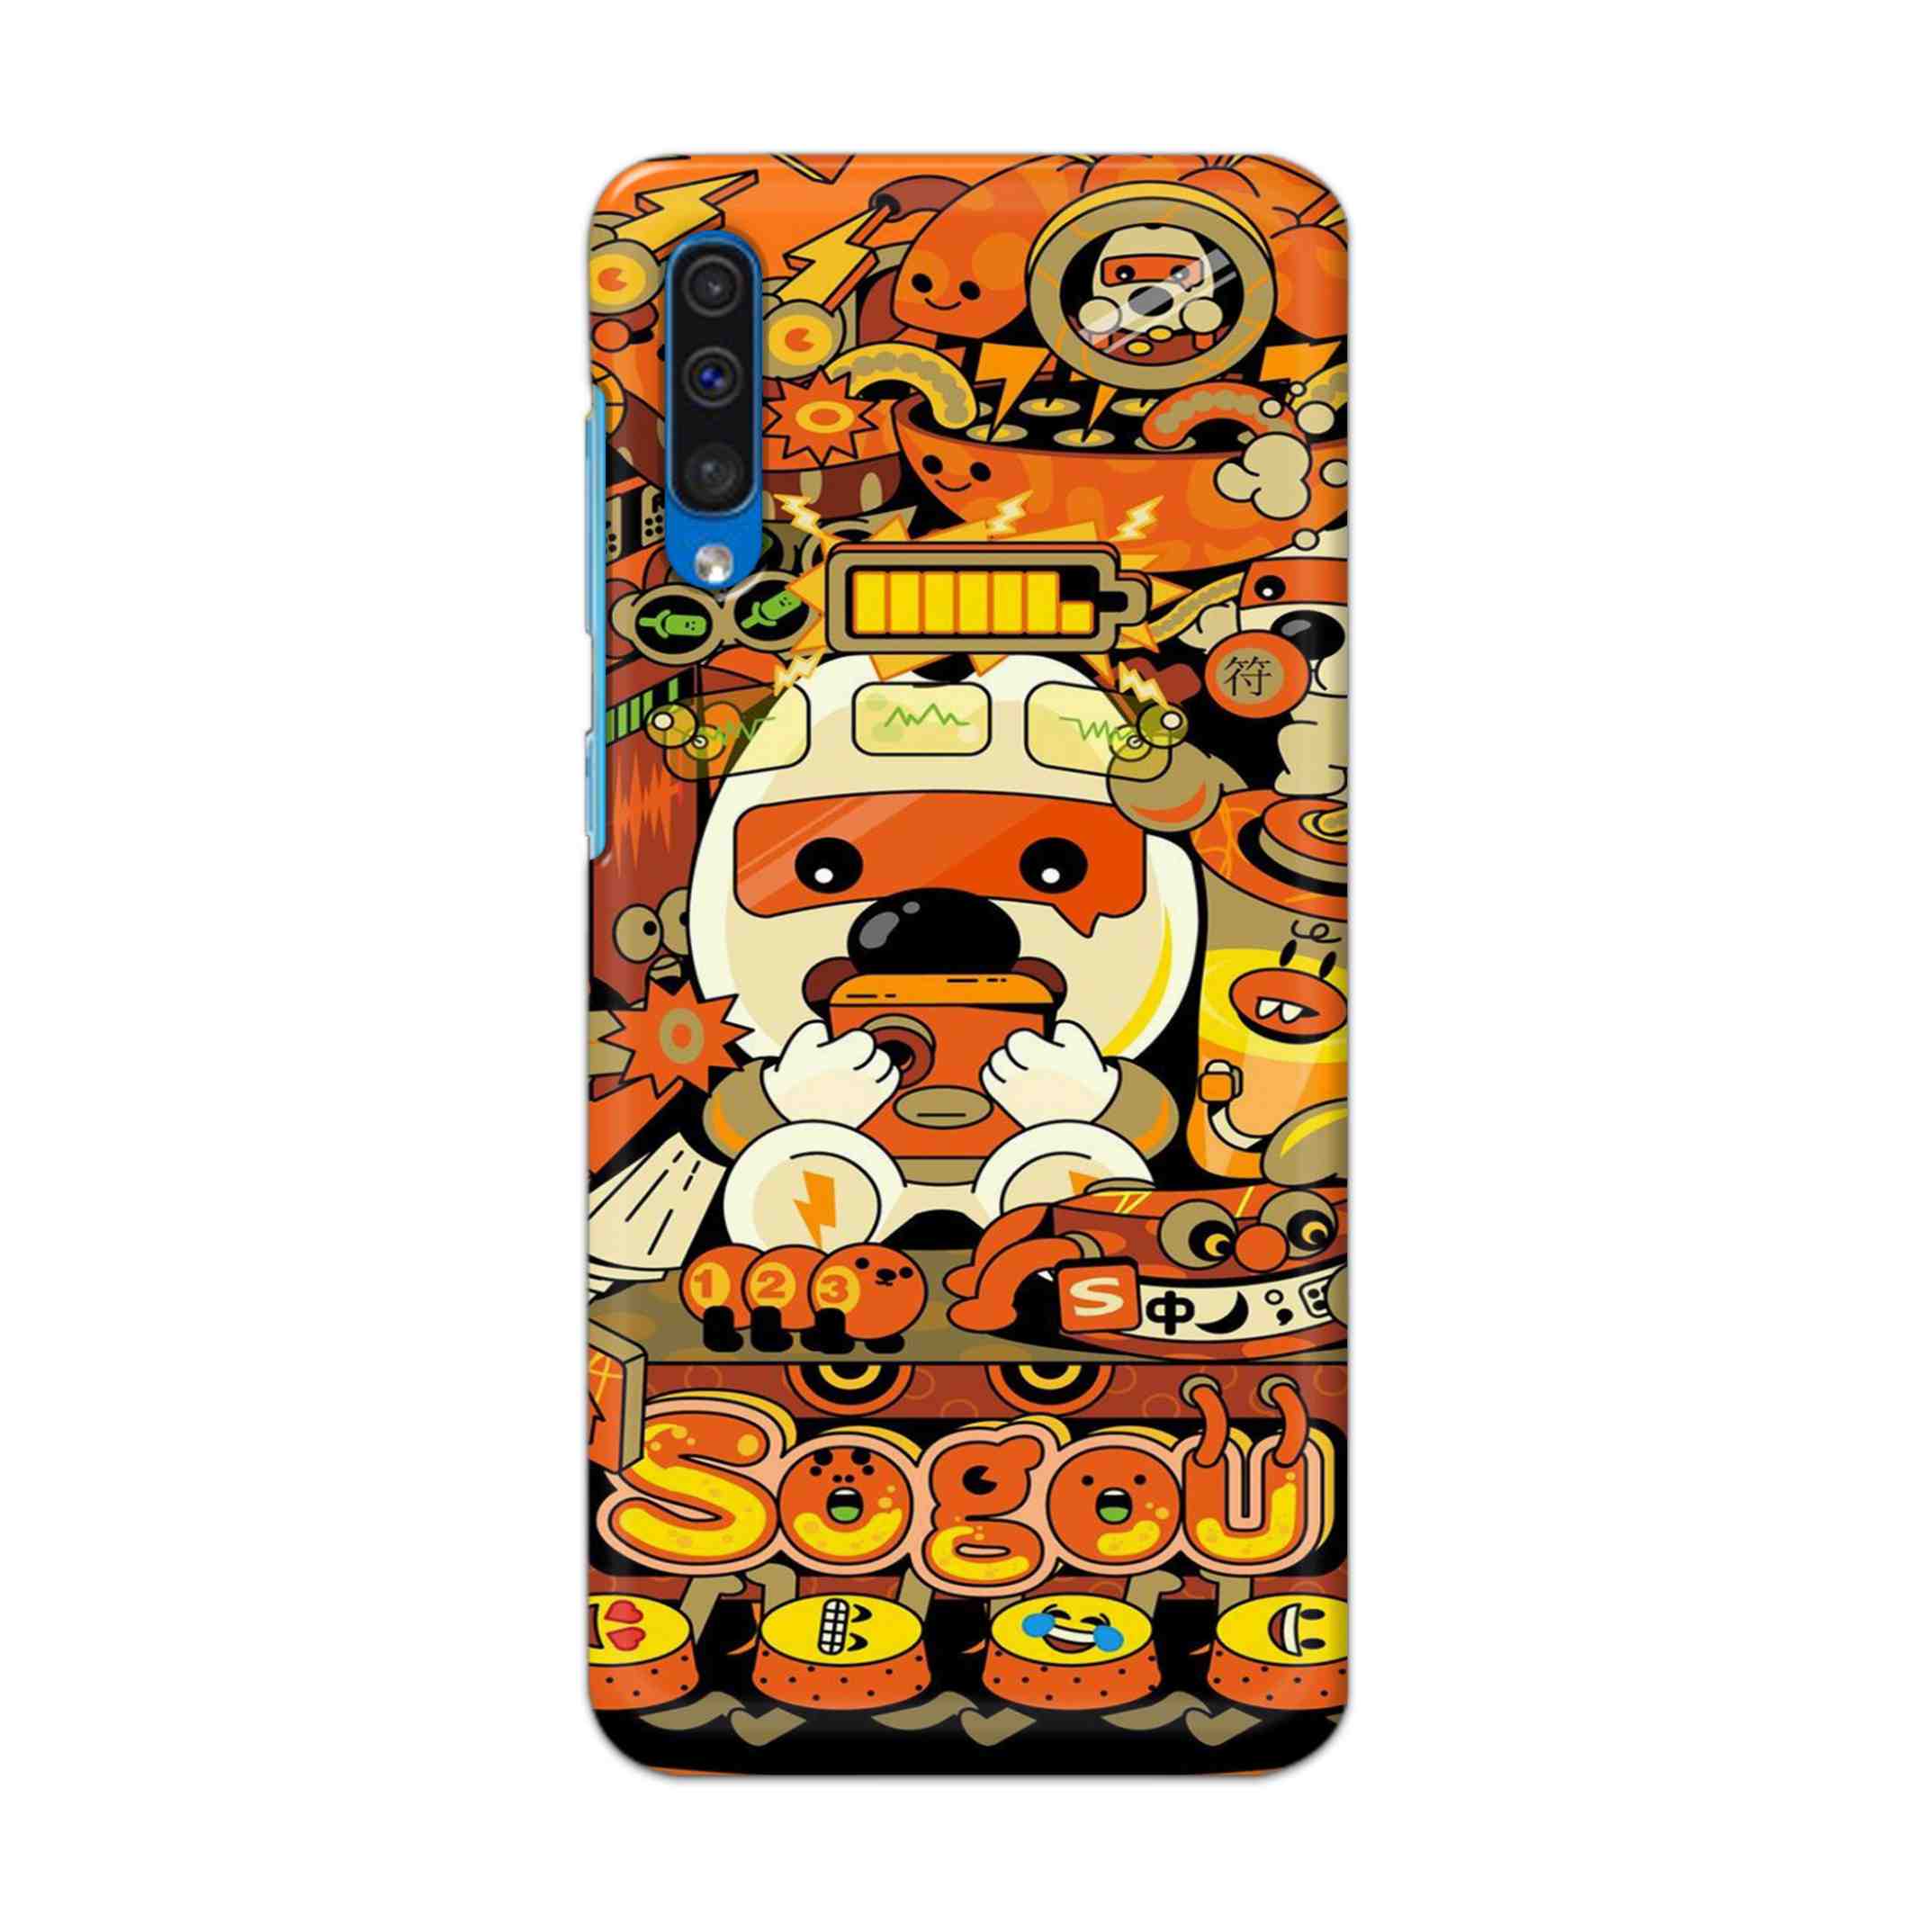 Buy Sogou Hard Back Mobile Phone Case Cover For Samsung Galaxy A50 / A50s / A30s Online